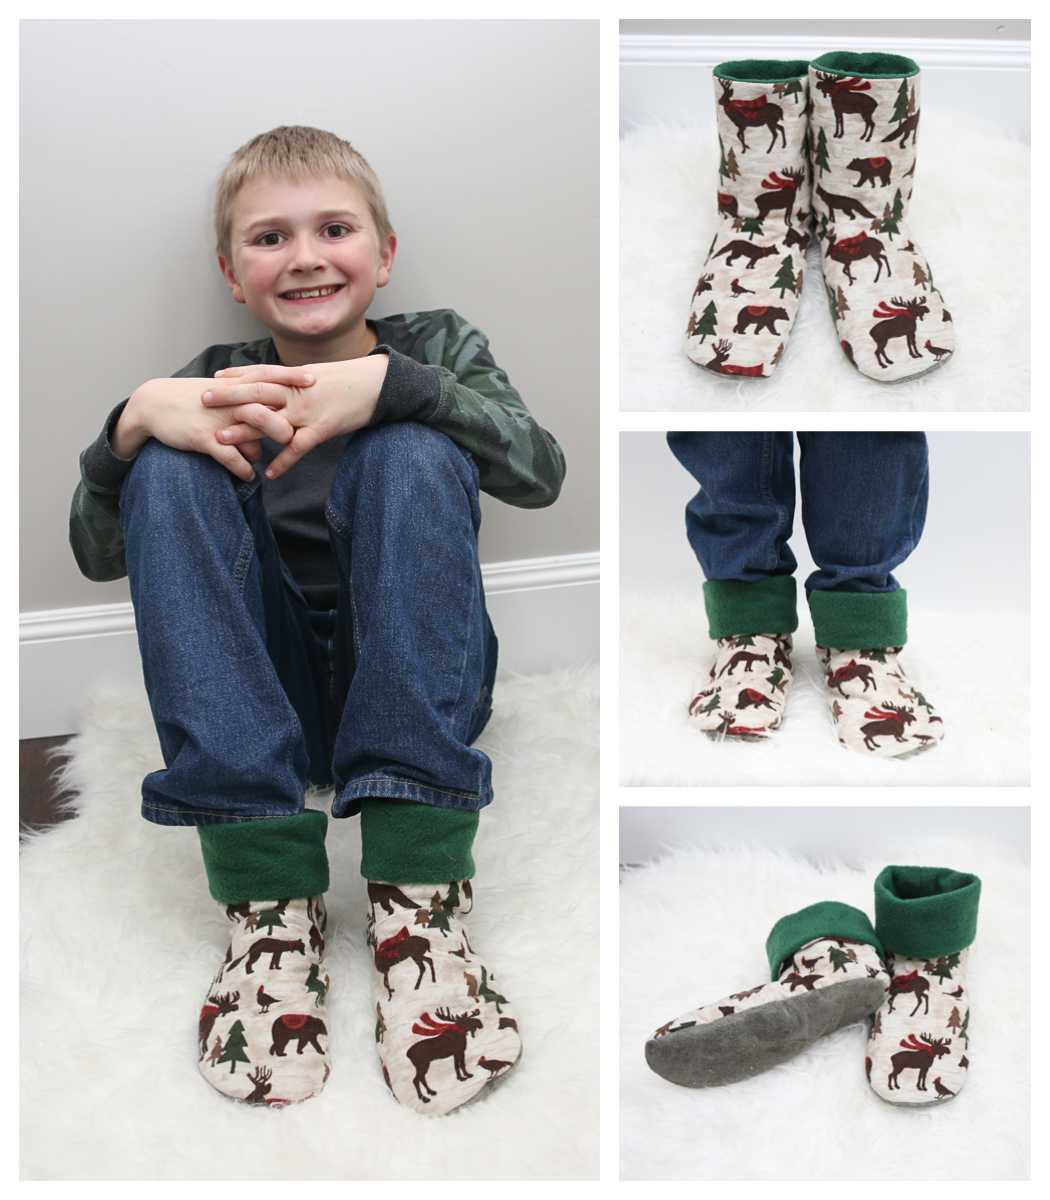 Cozy Critters | Newborn, Child, & Adult Slipper Boots | 2 Colors for Anti-Slip Soles